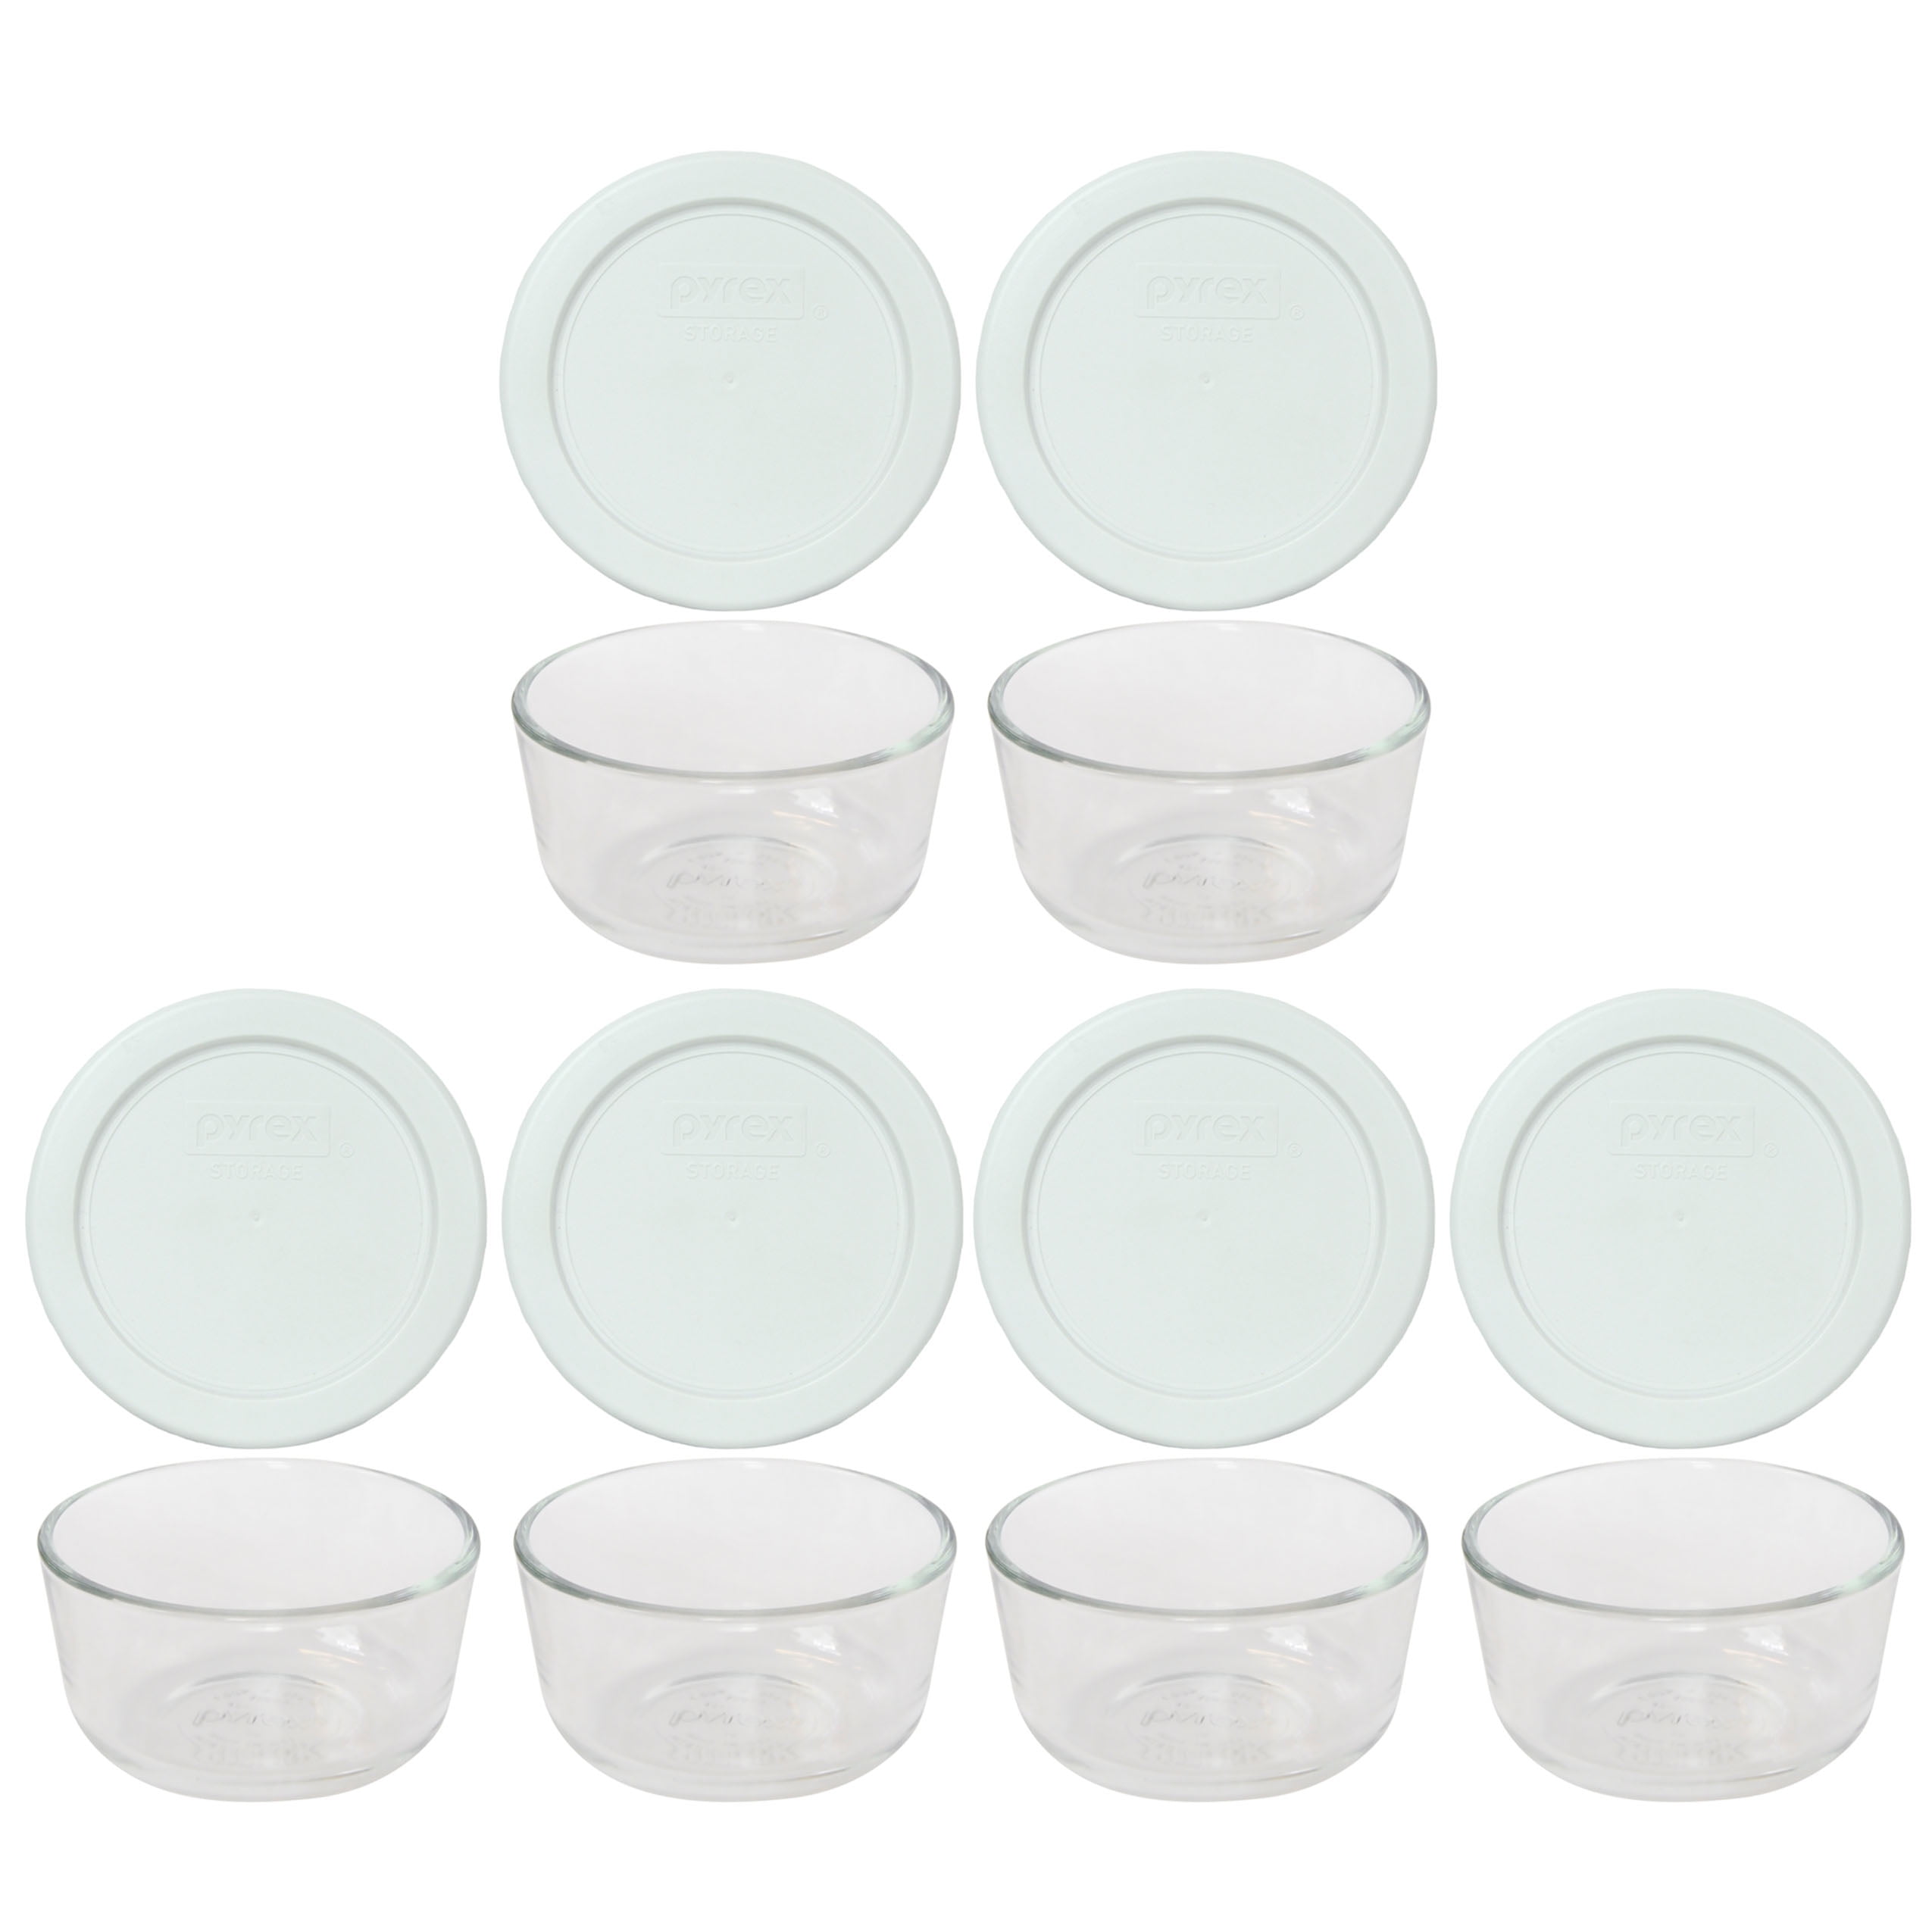 Pyrex 7202 1-Cup Clear Round Glass Food Storage Bowl and 7202-PC Plum Purple Plastic Lid (6-pack)